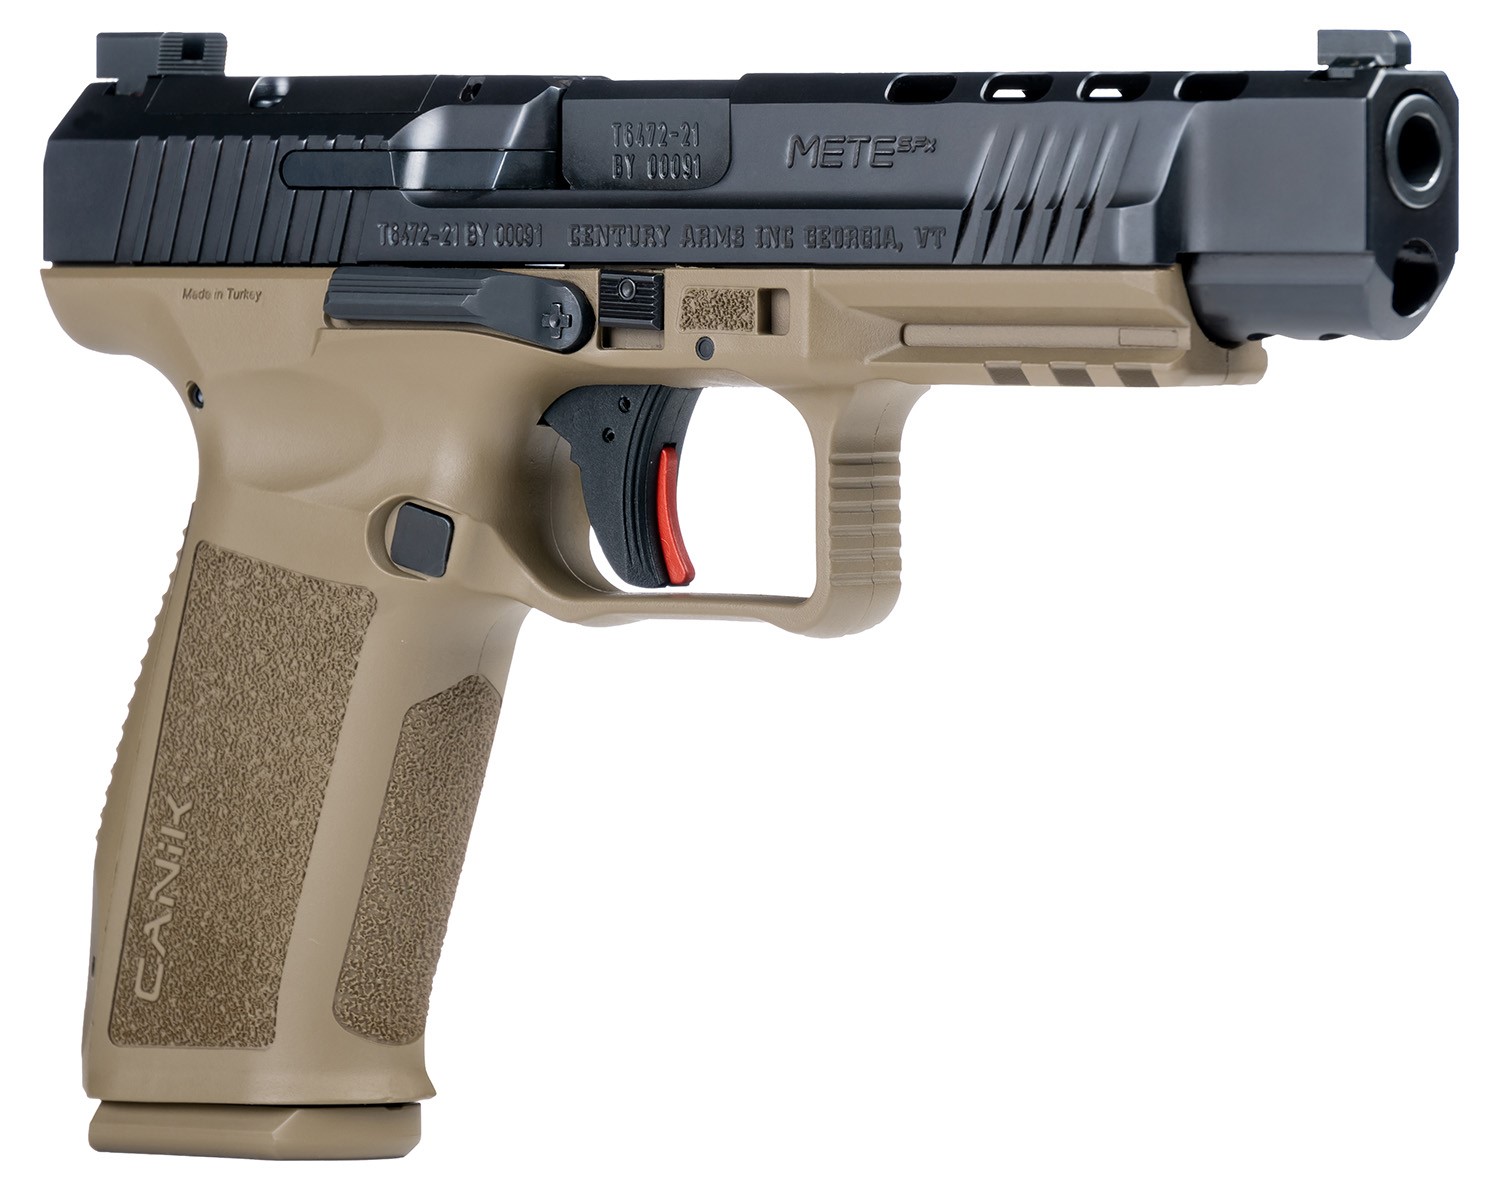 CANIK METE SFX 9MM BLK/FDE, 5.2" W/20RD & 18RD MAGS